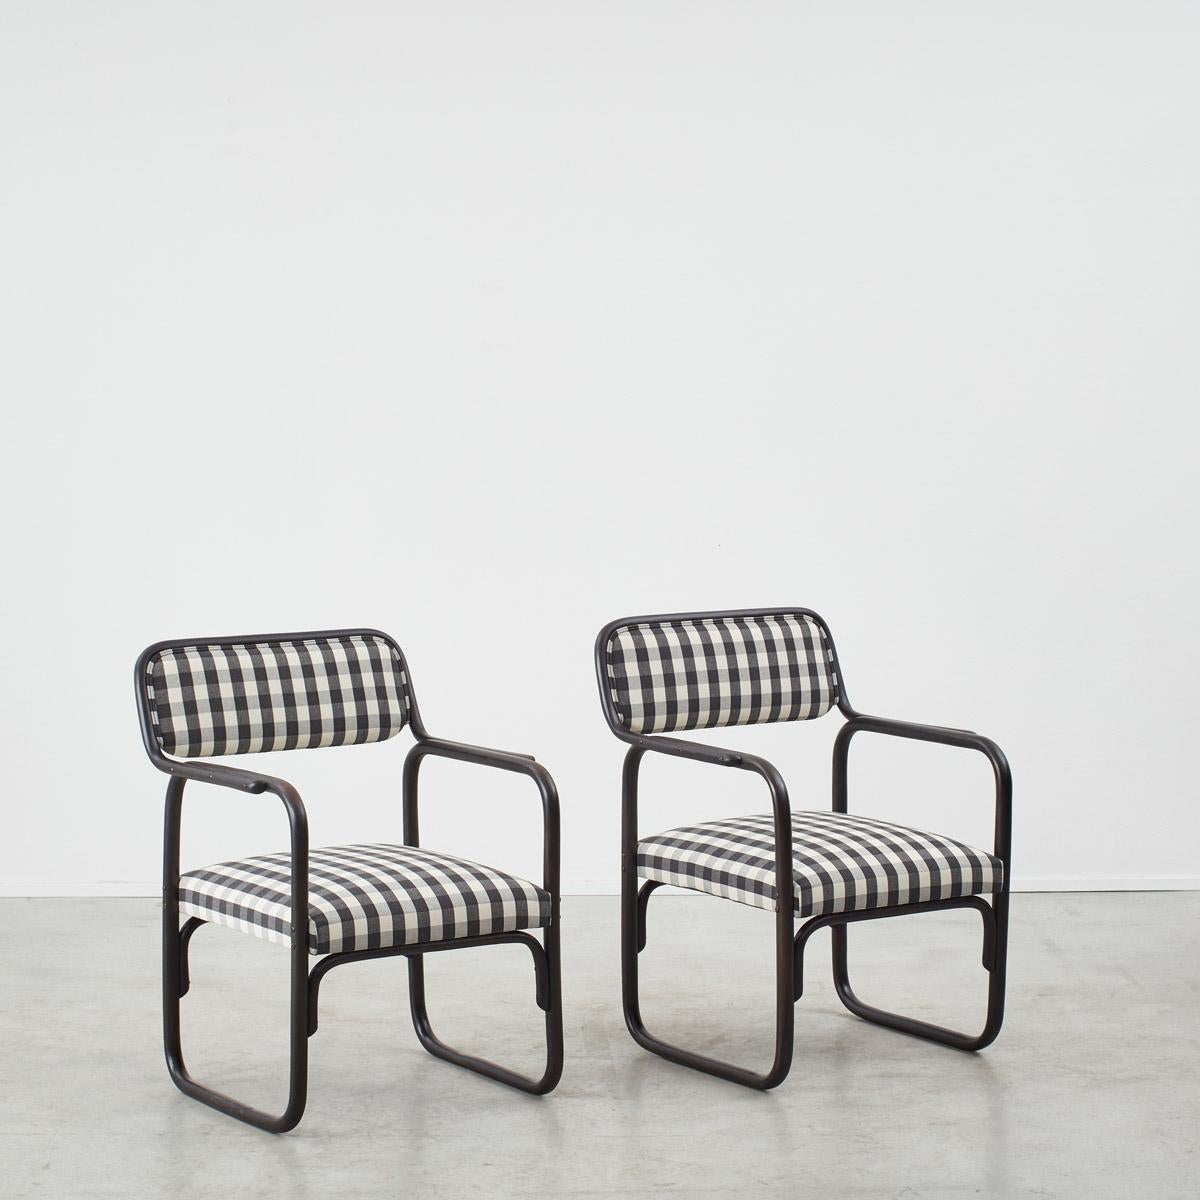 With their Bauhaus form this pair of ‘A 60 F’ armchairs by Thonet Mundus epitomise avant-garde design. Their arms and legs connect round to form a soft rectangular form, giving the chair a gentle yet stable rock. The A 60 series defied expectations